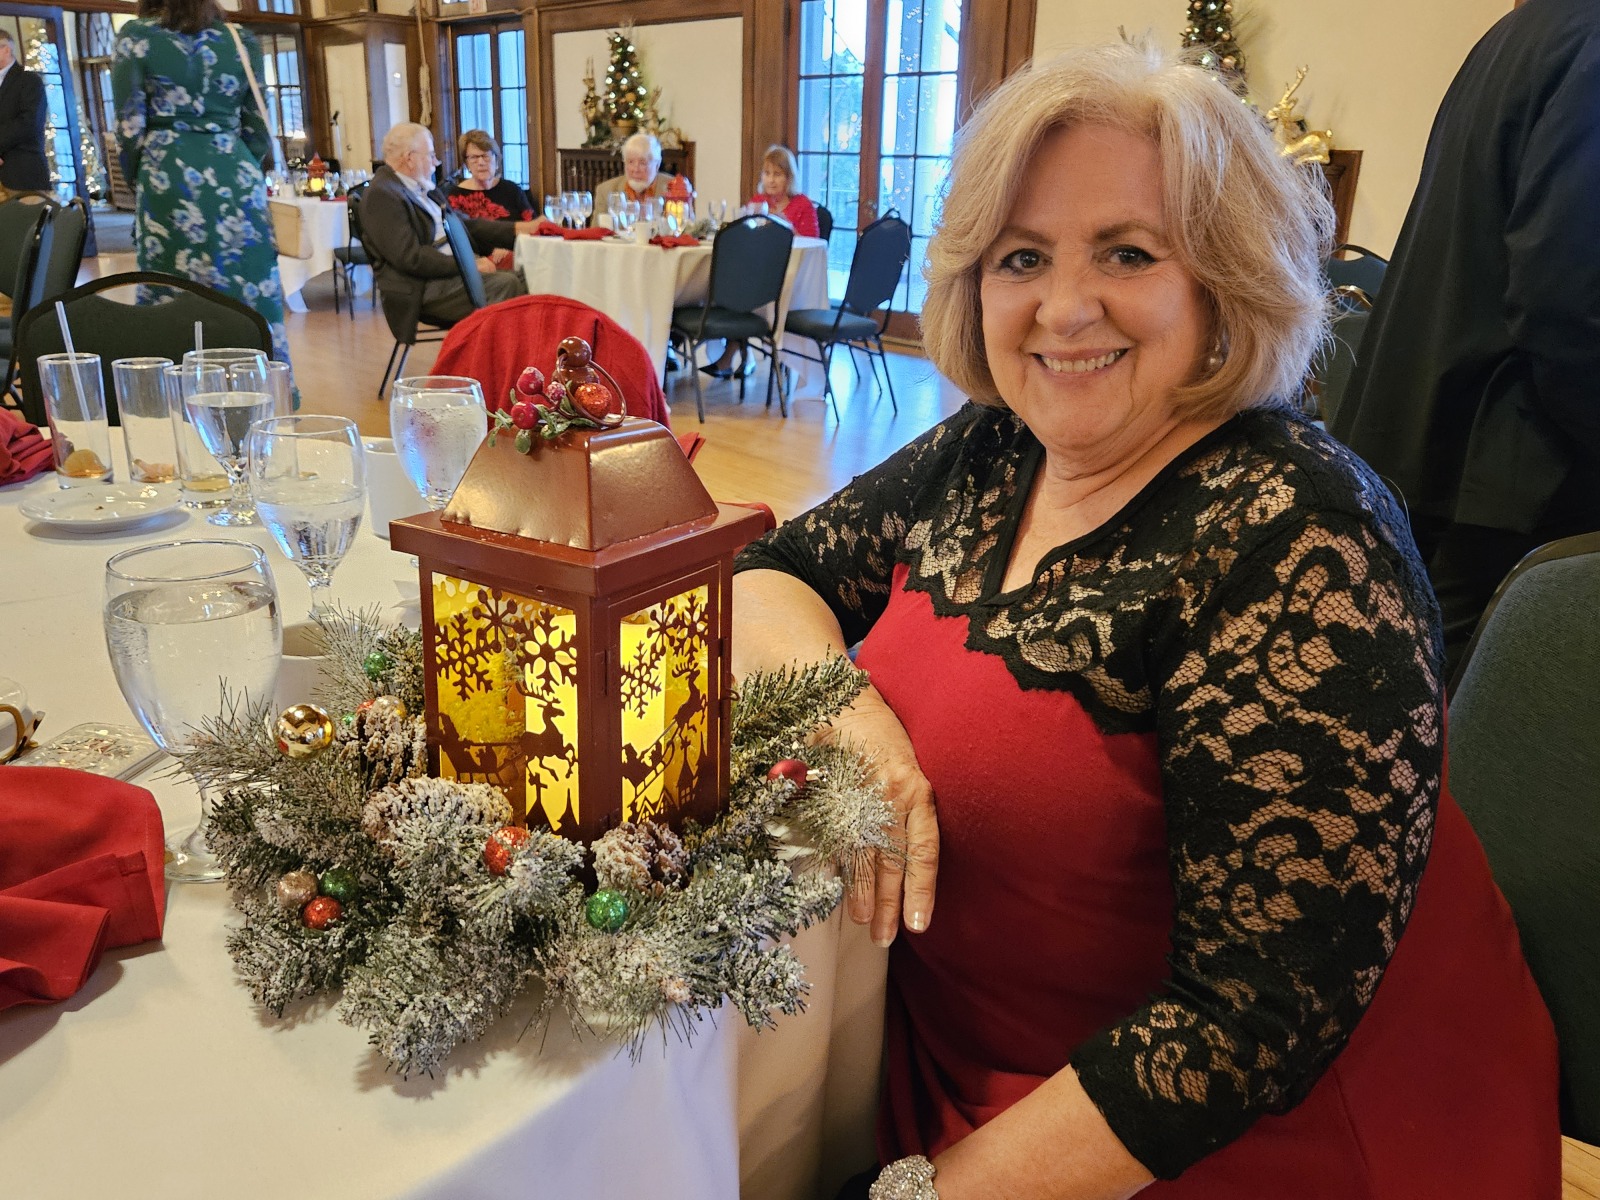 Elena-Olivieri-from-Shelby-Twp-made-centerpieces